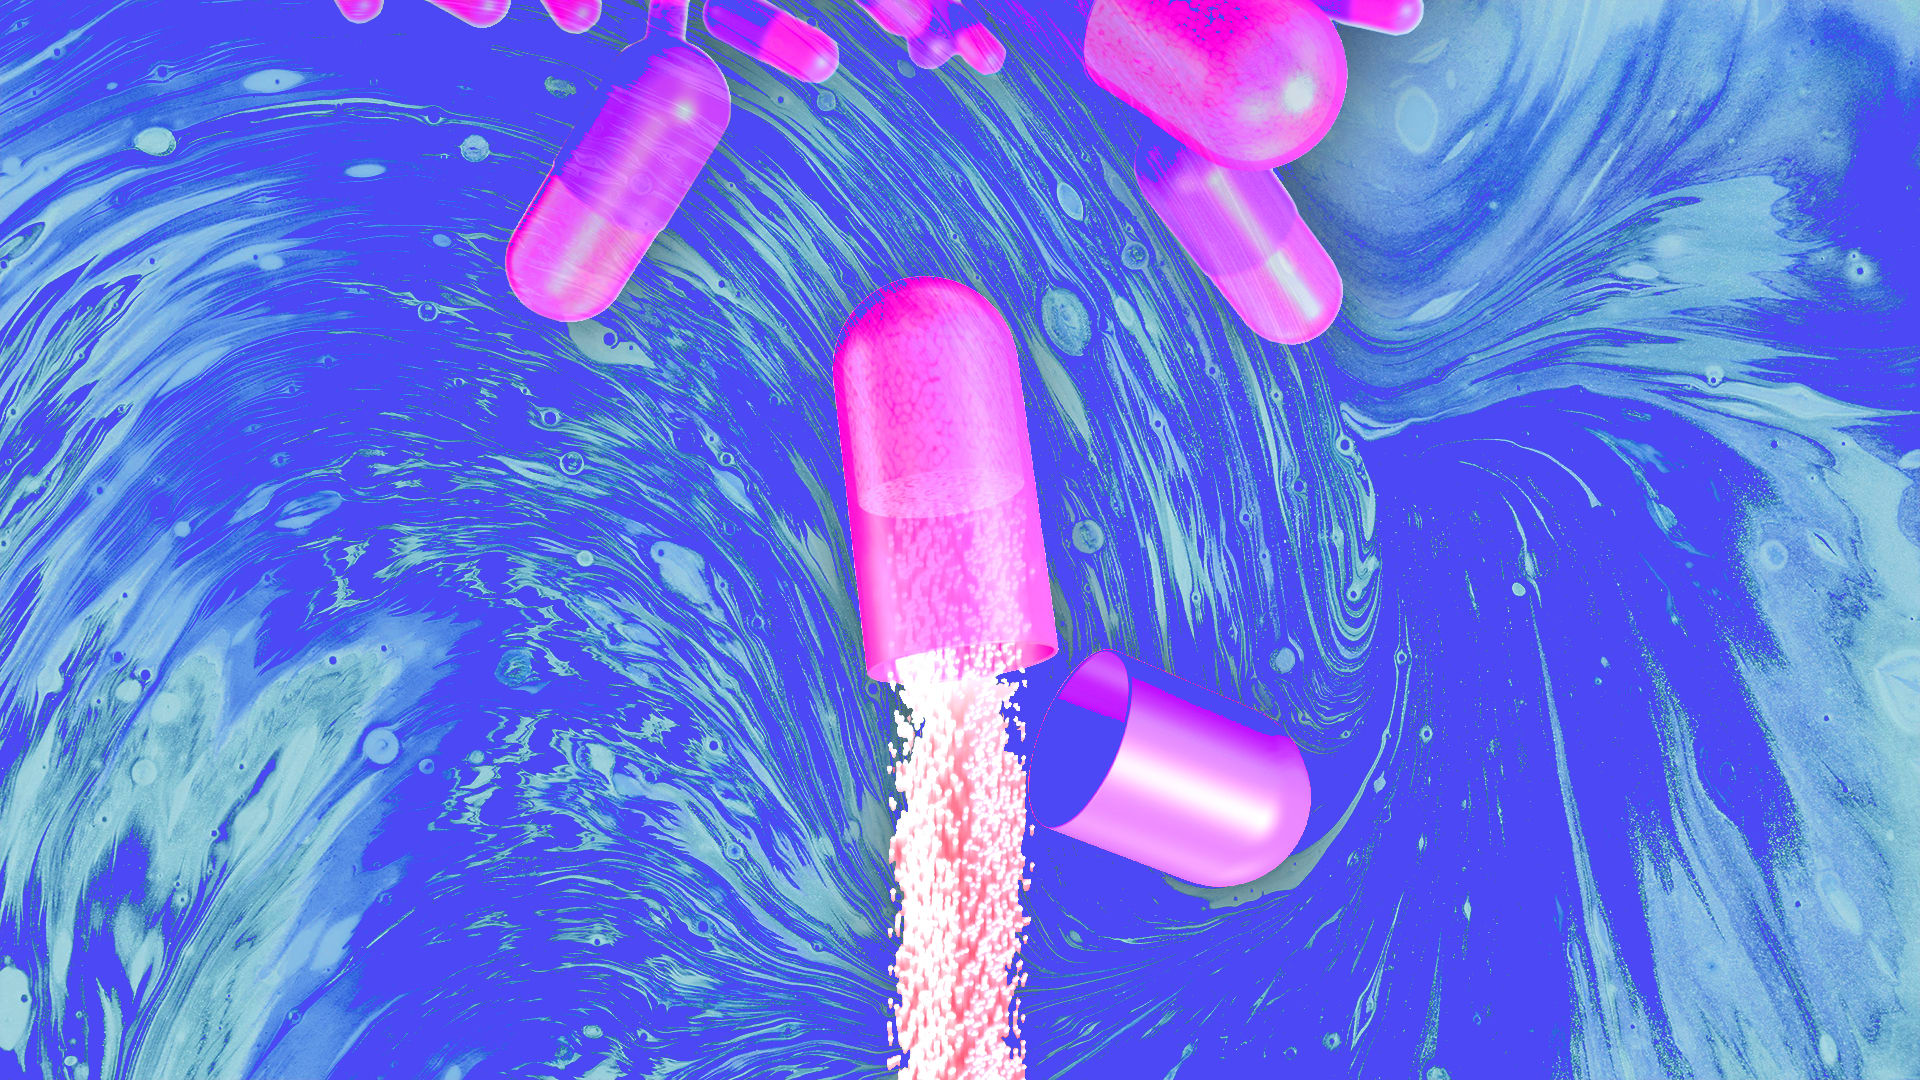 Two bioengineers explain how we could deliver drugs that better withstand stomach acid